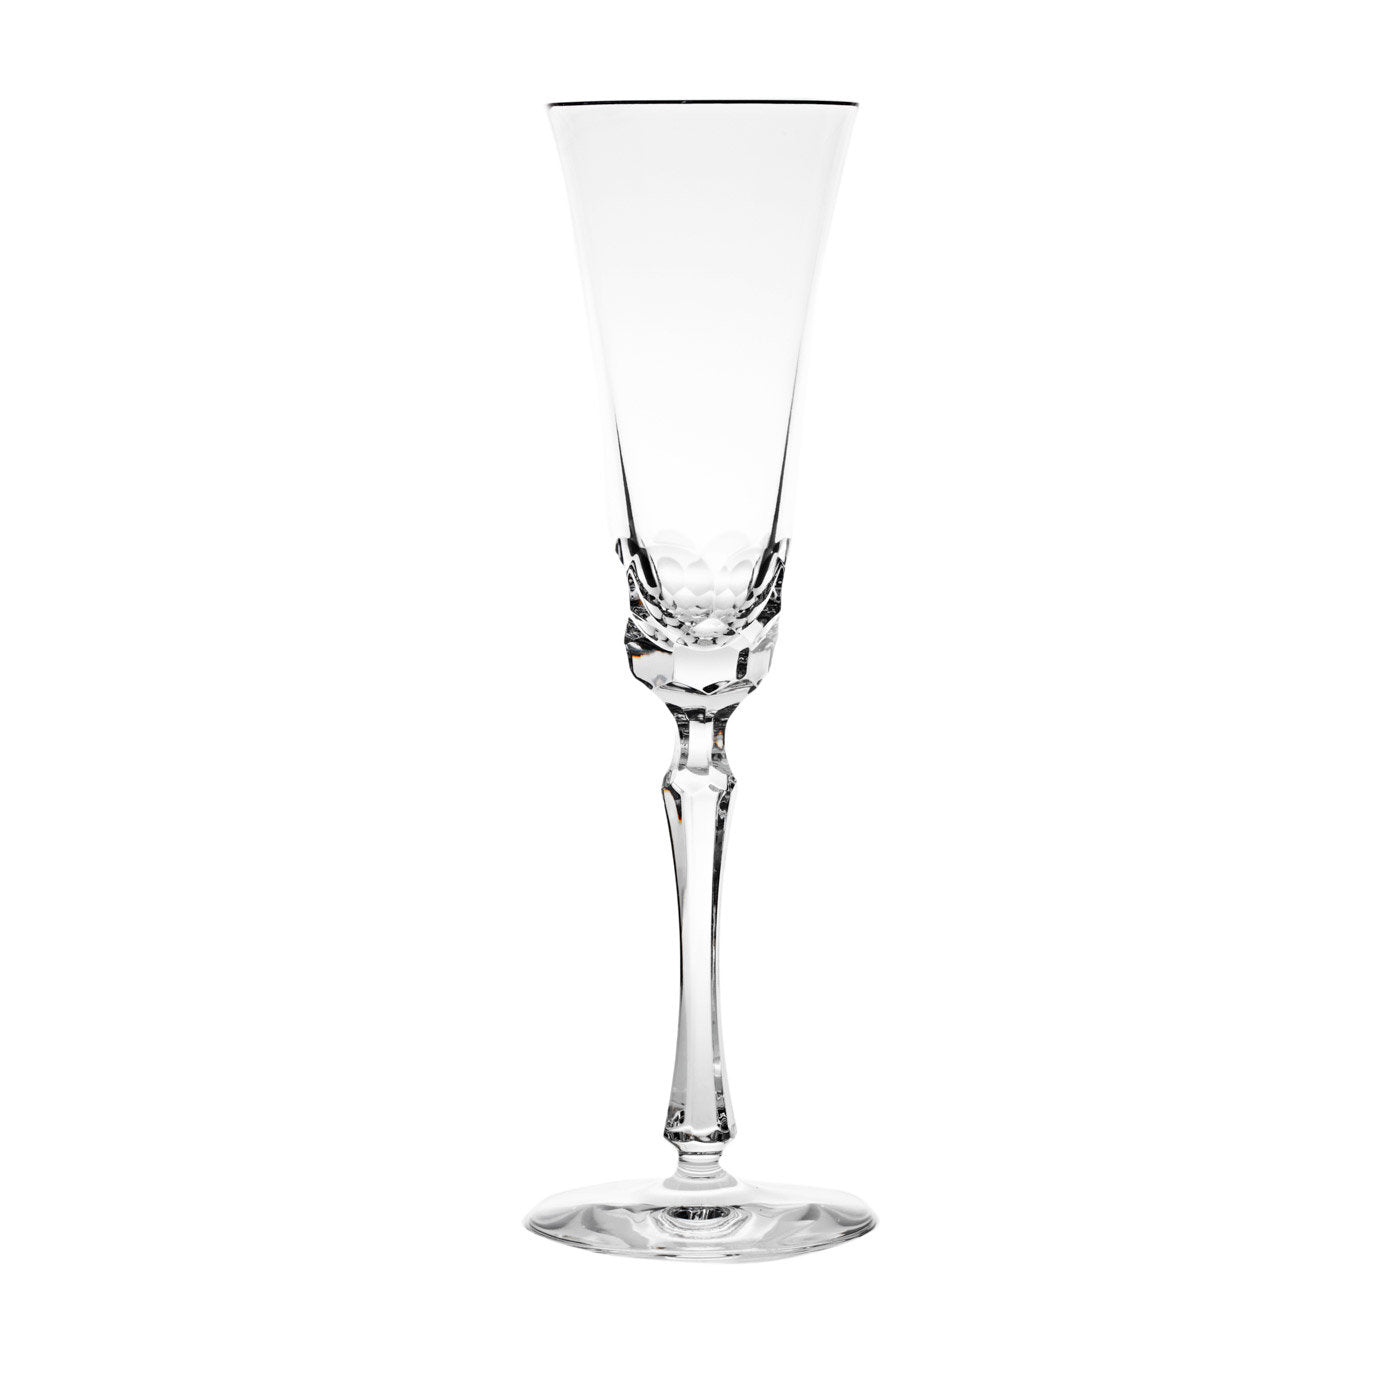 Set of 6 Narciso Crystal Flutes - Alternative view 2